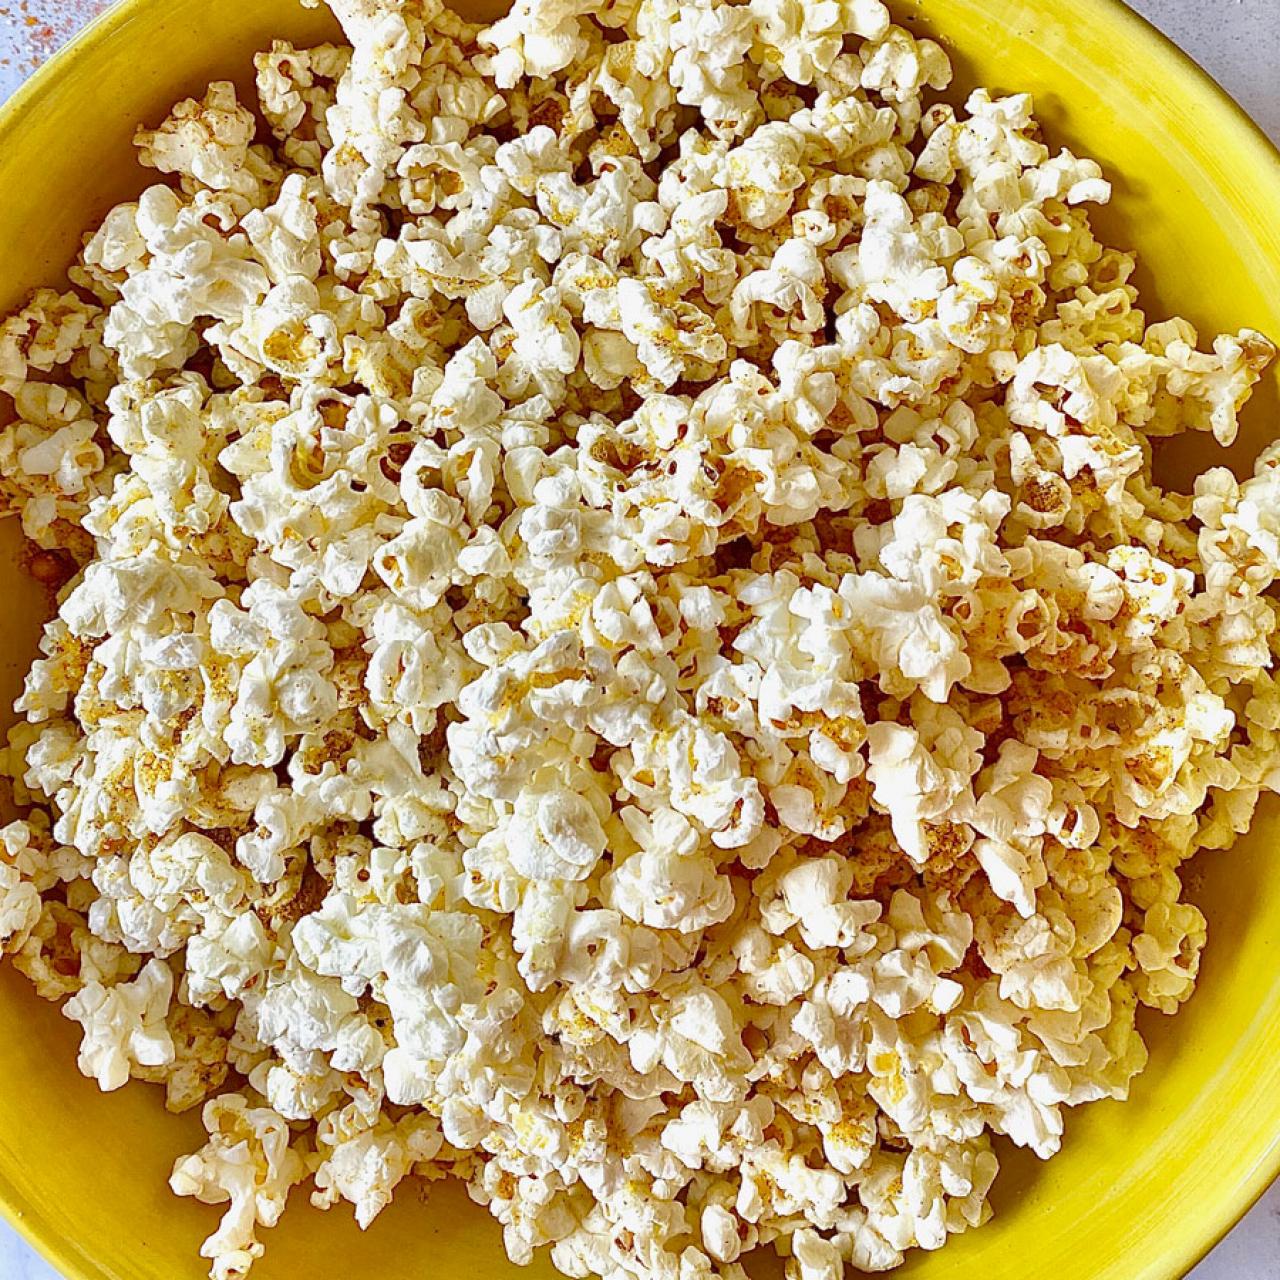 Movie Night Popcorn Trays Made From Dollar Store Supplies - Cook Eat Go